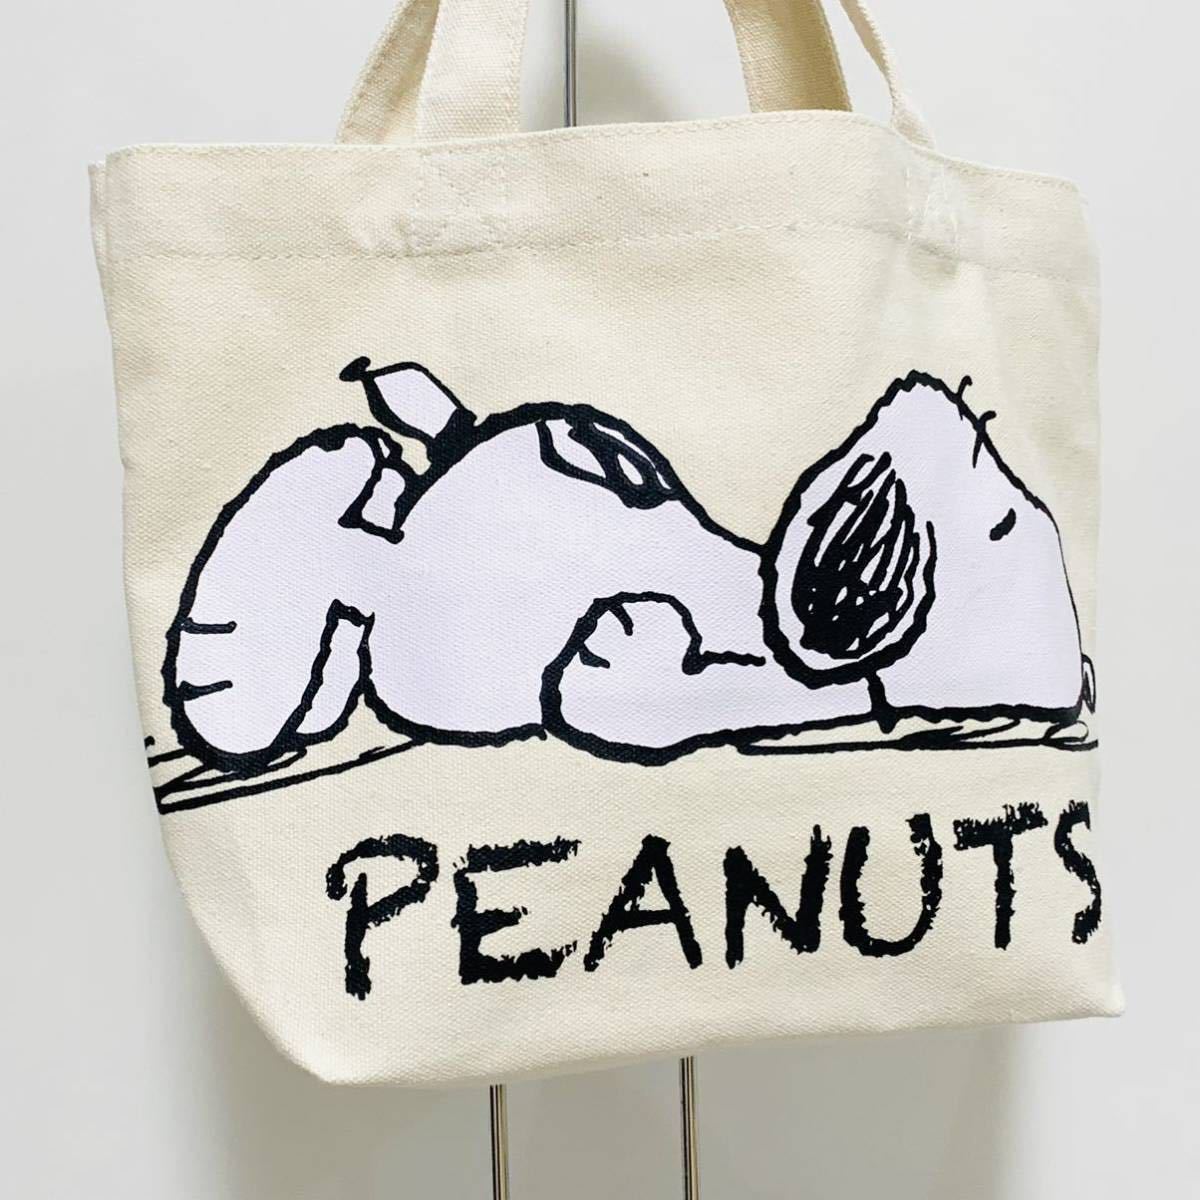  tote bag bag lunch tote bag Snoopy SNOOPY